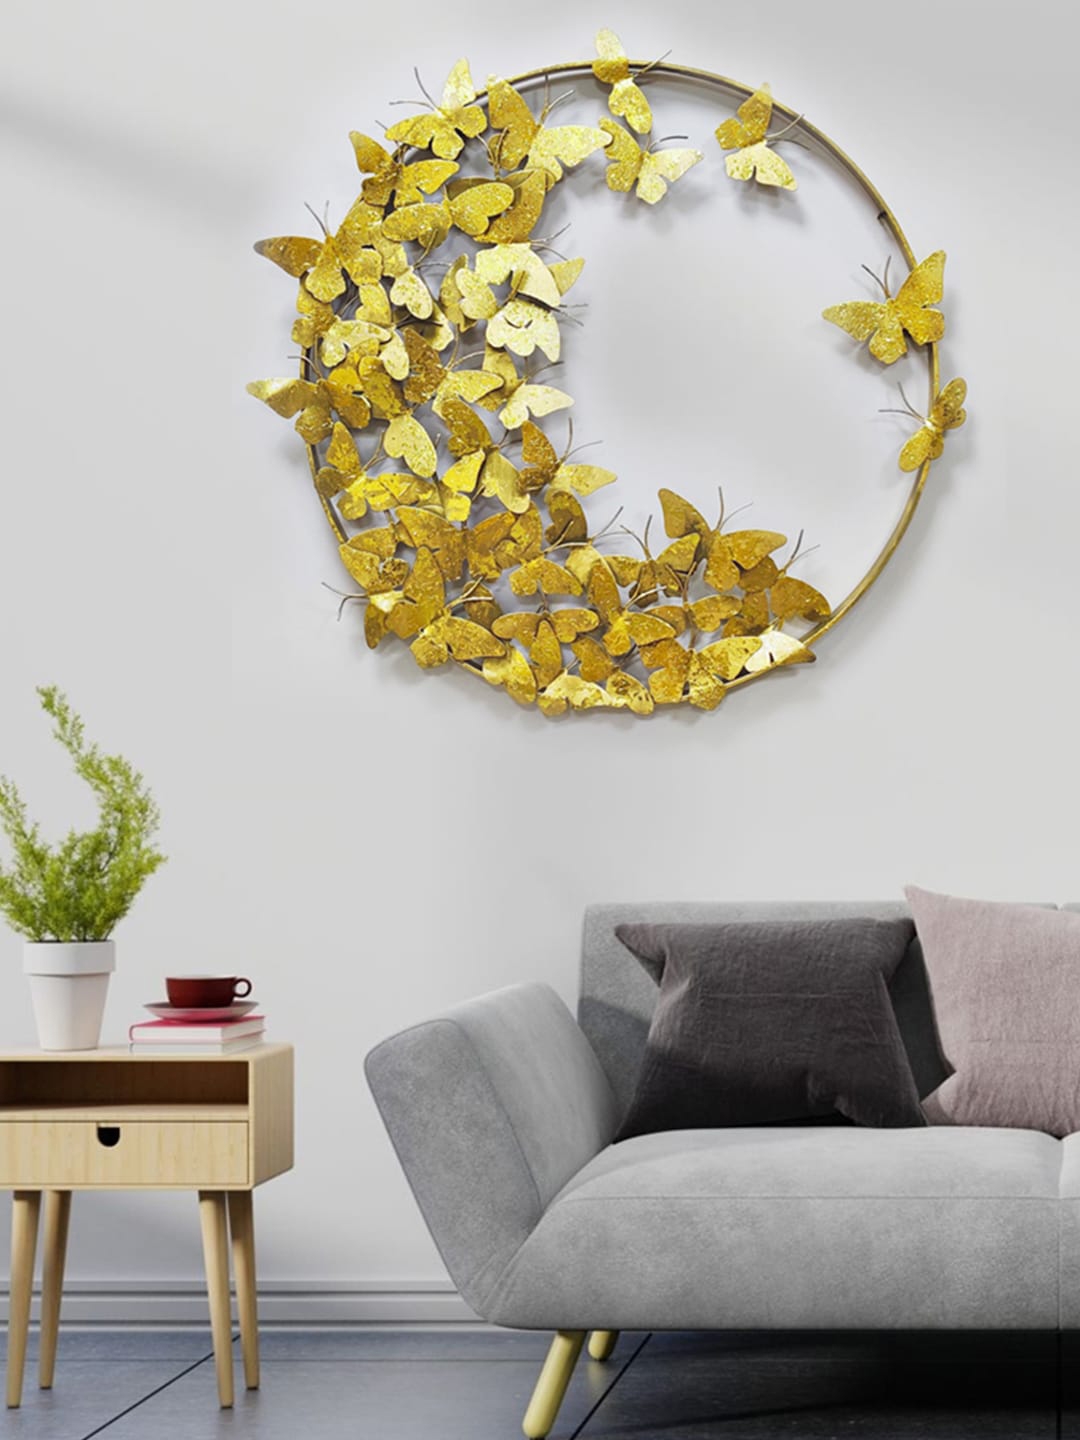 Wembley Toys Gold-Toned Flying Butterflies Wall Decor